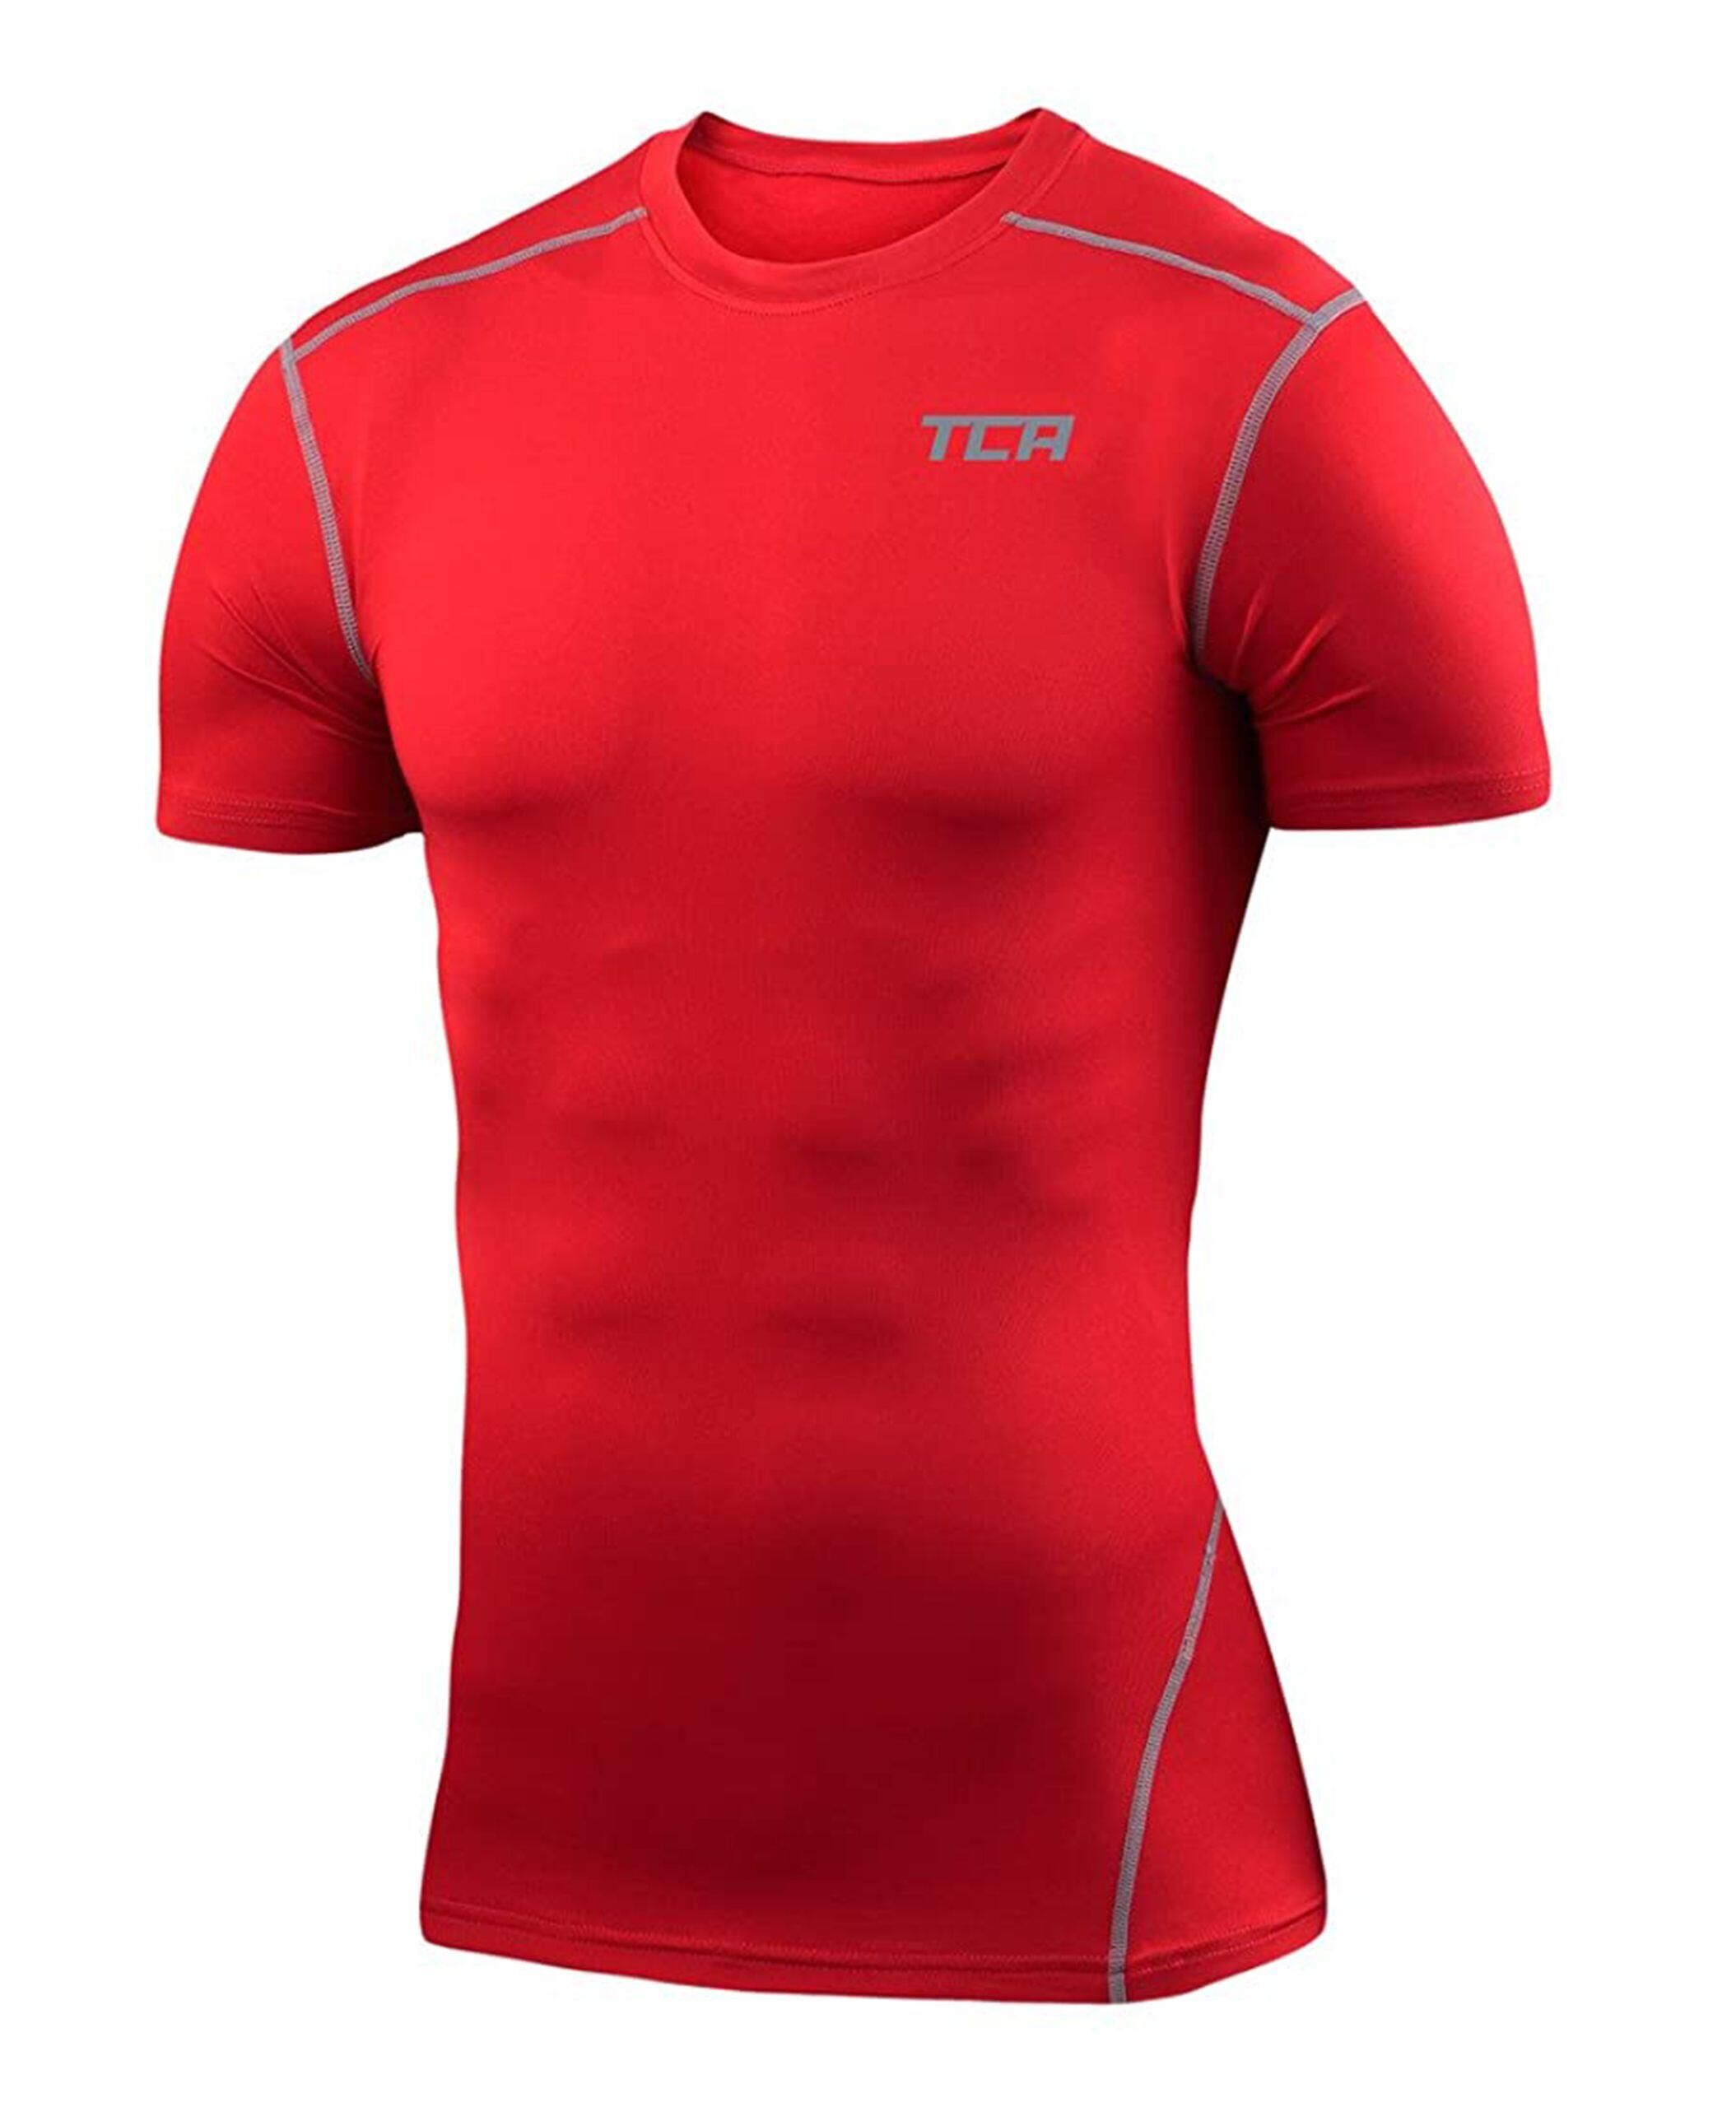 TCA Boys' Performance Base Layer Compression T-shirt - Team Red